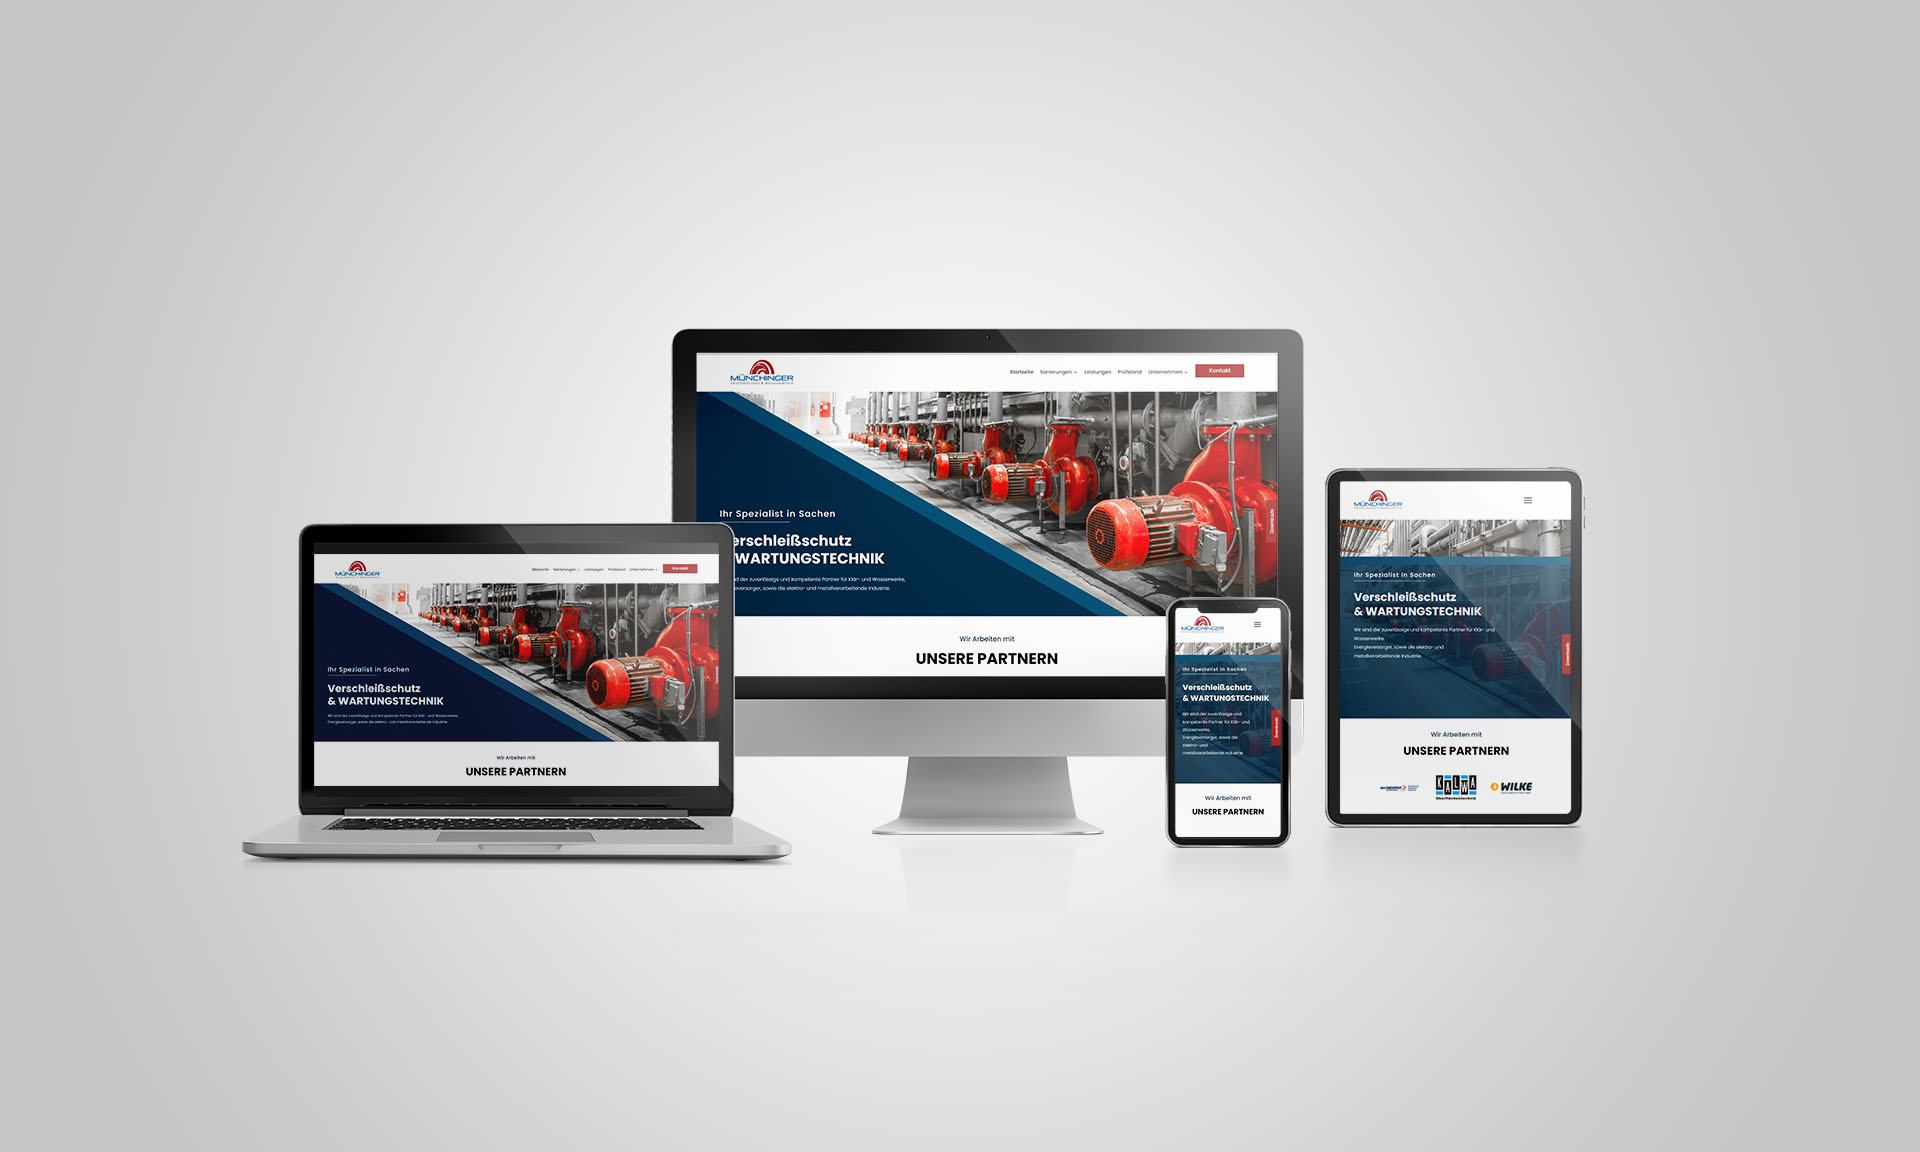 Project Muenchinger 0 webdesign